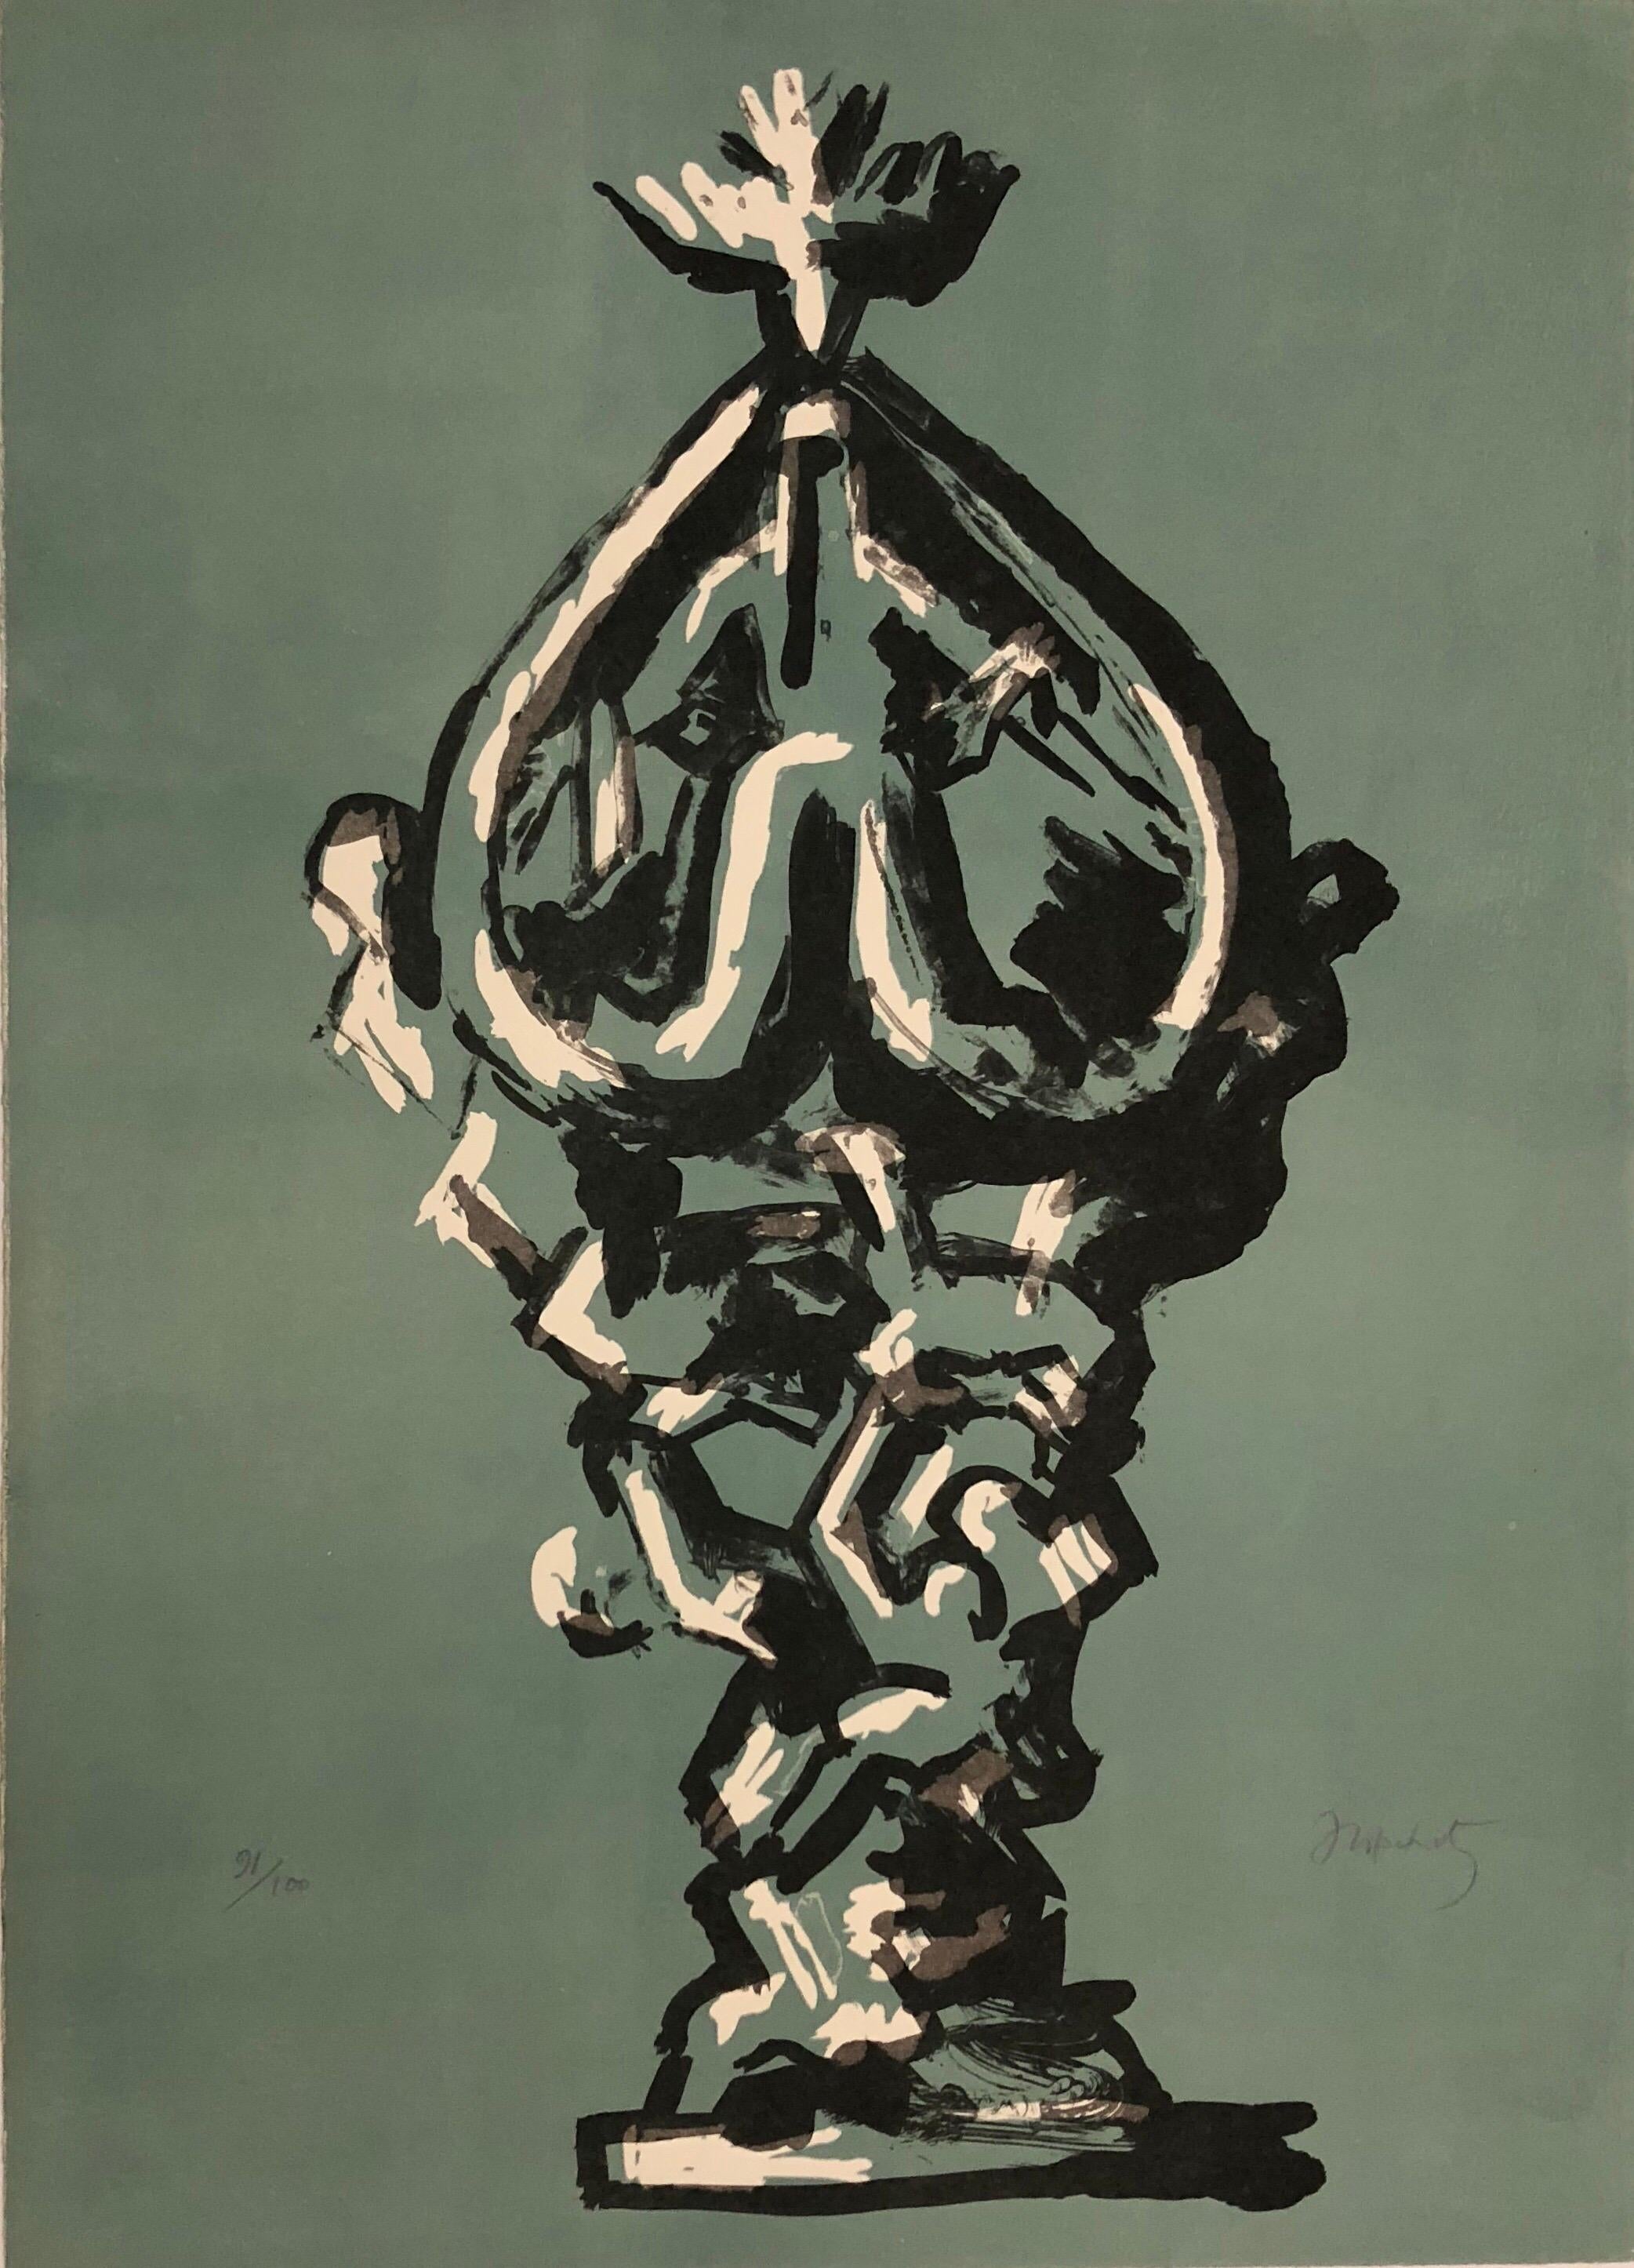 lithograph printed on deckle edged Arches paper. Signed and numbered in pencil.
Peace on Earth
Jacques Lipchitz (1891-1973) was a Cubist sculptor, Painter and Lithographer. From late 1914. Lipchitz retained highly figurative and legible components